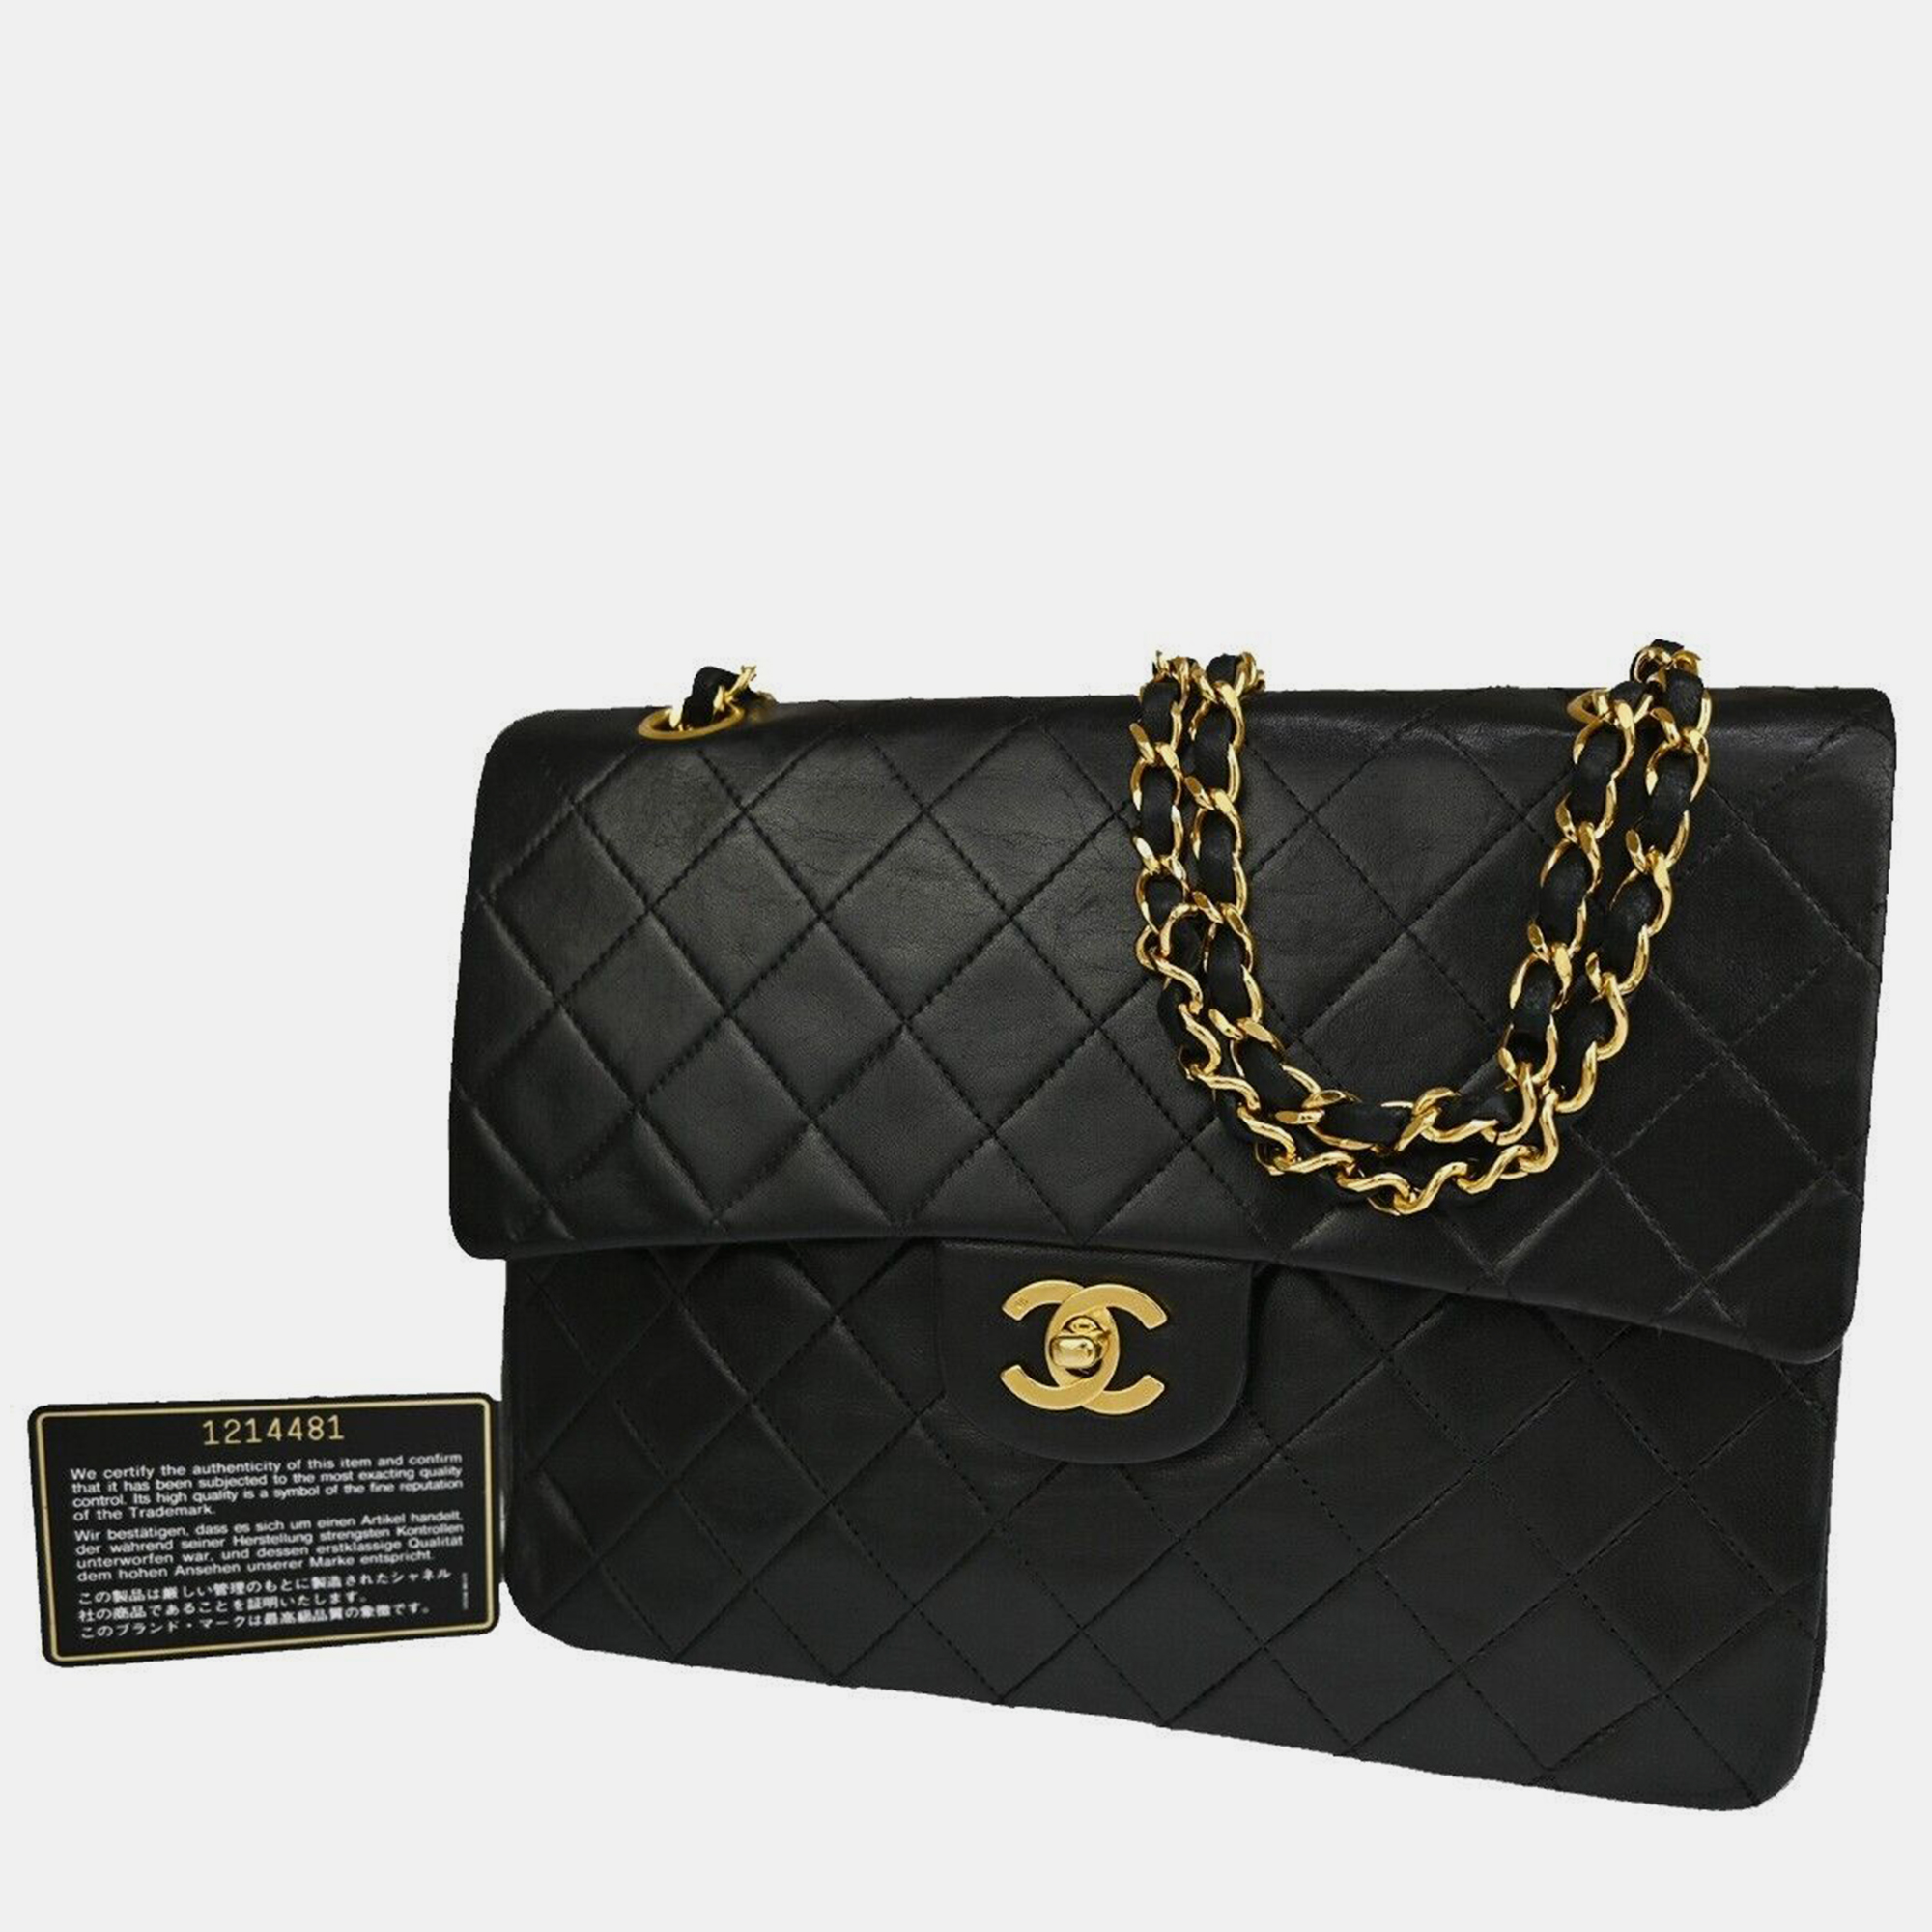 Pre-owned Chanel Black Leather Single Flap Bag